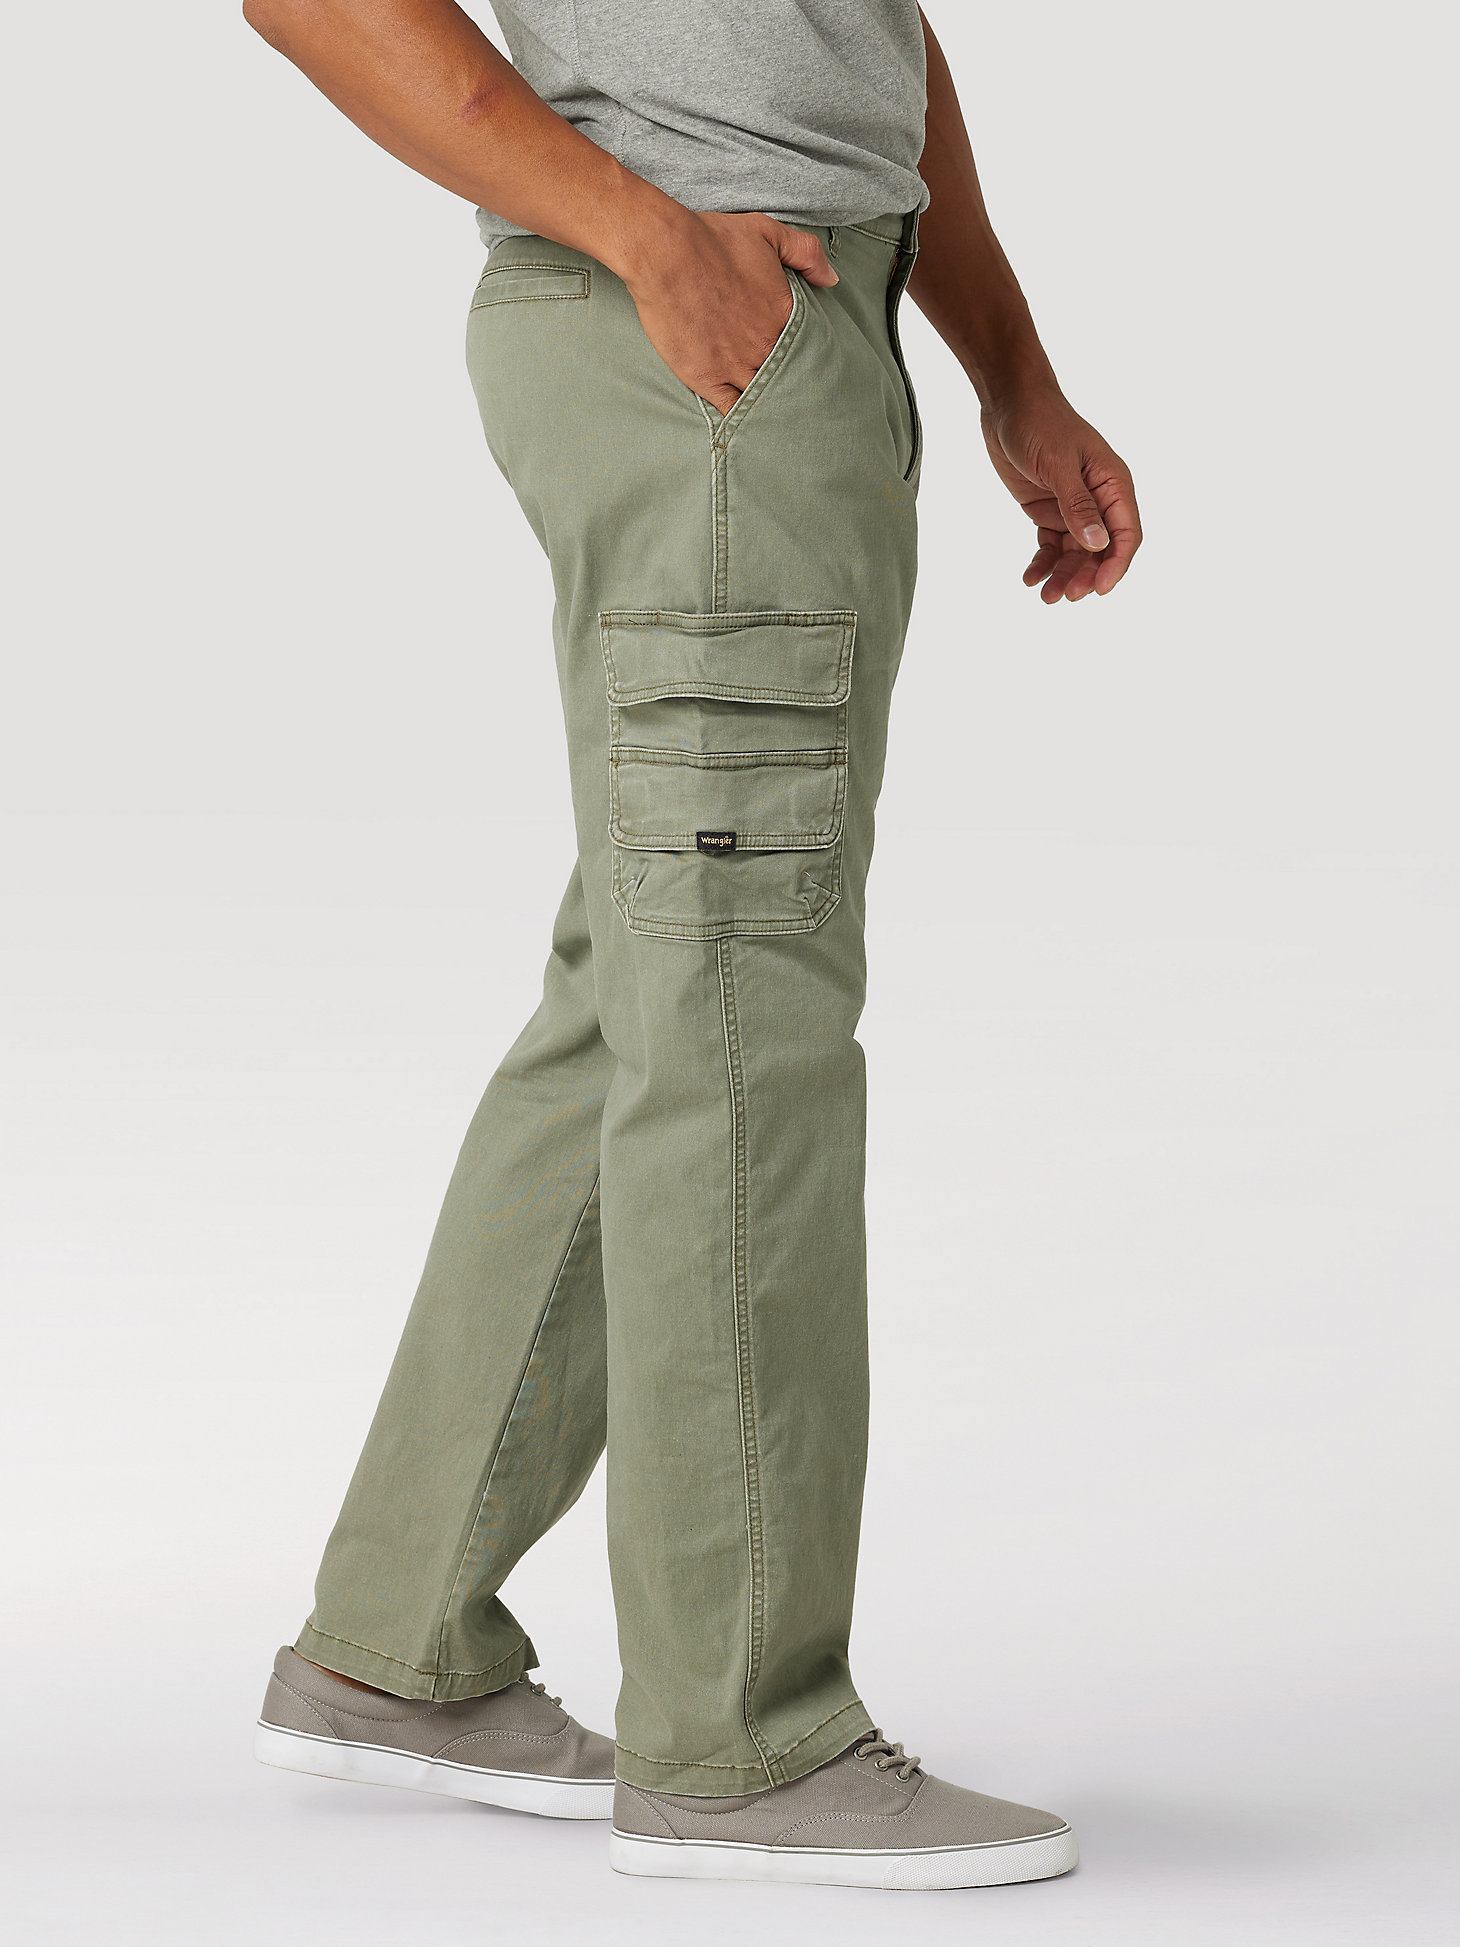 Men's Epic Soft Cargo Pant in Spruce alternative view 3